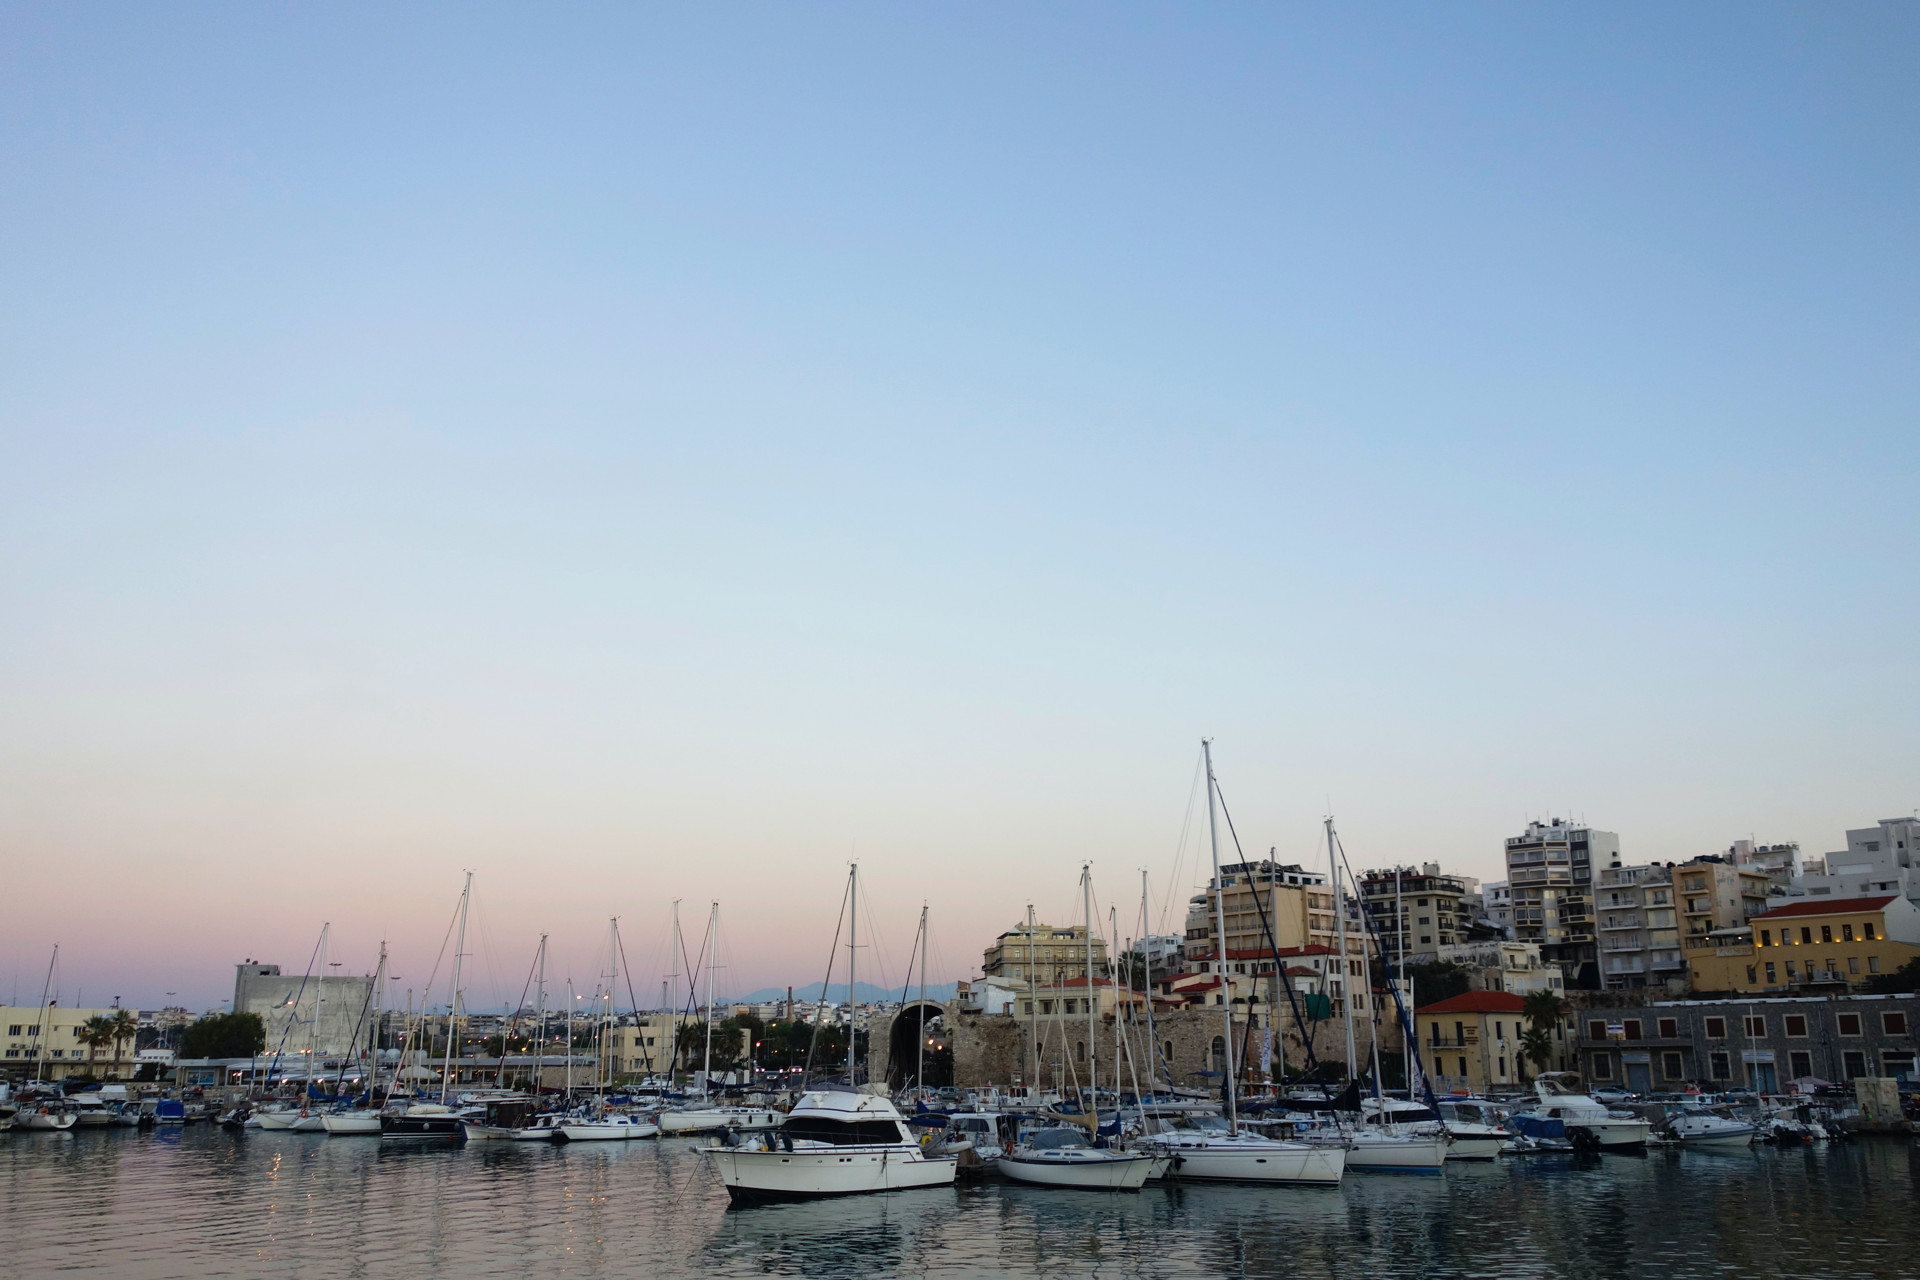 A walking tour of Heraklion is the best way to get to know Crete’s lively capital city